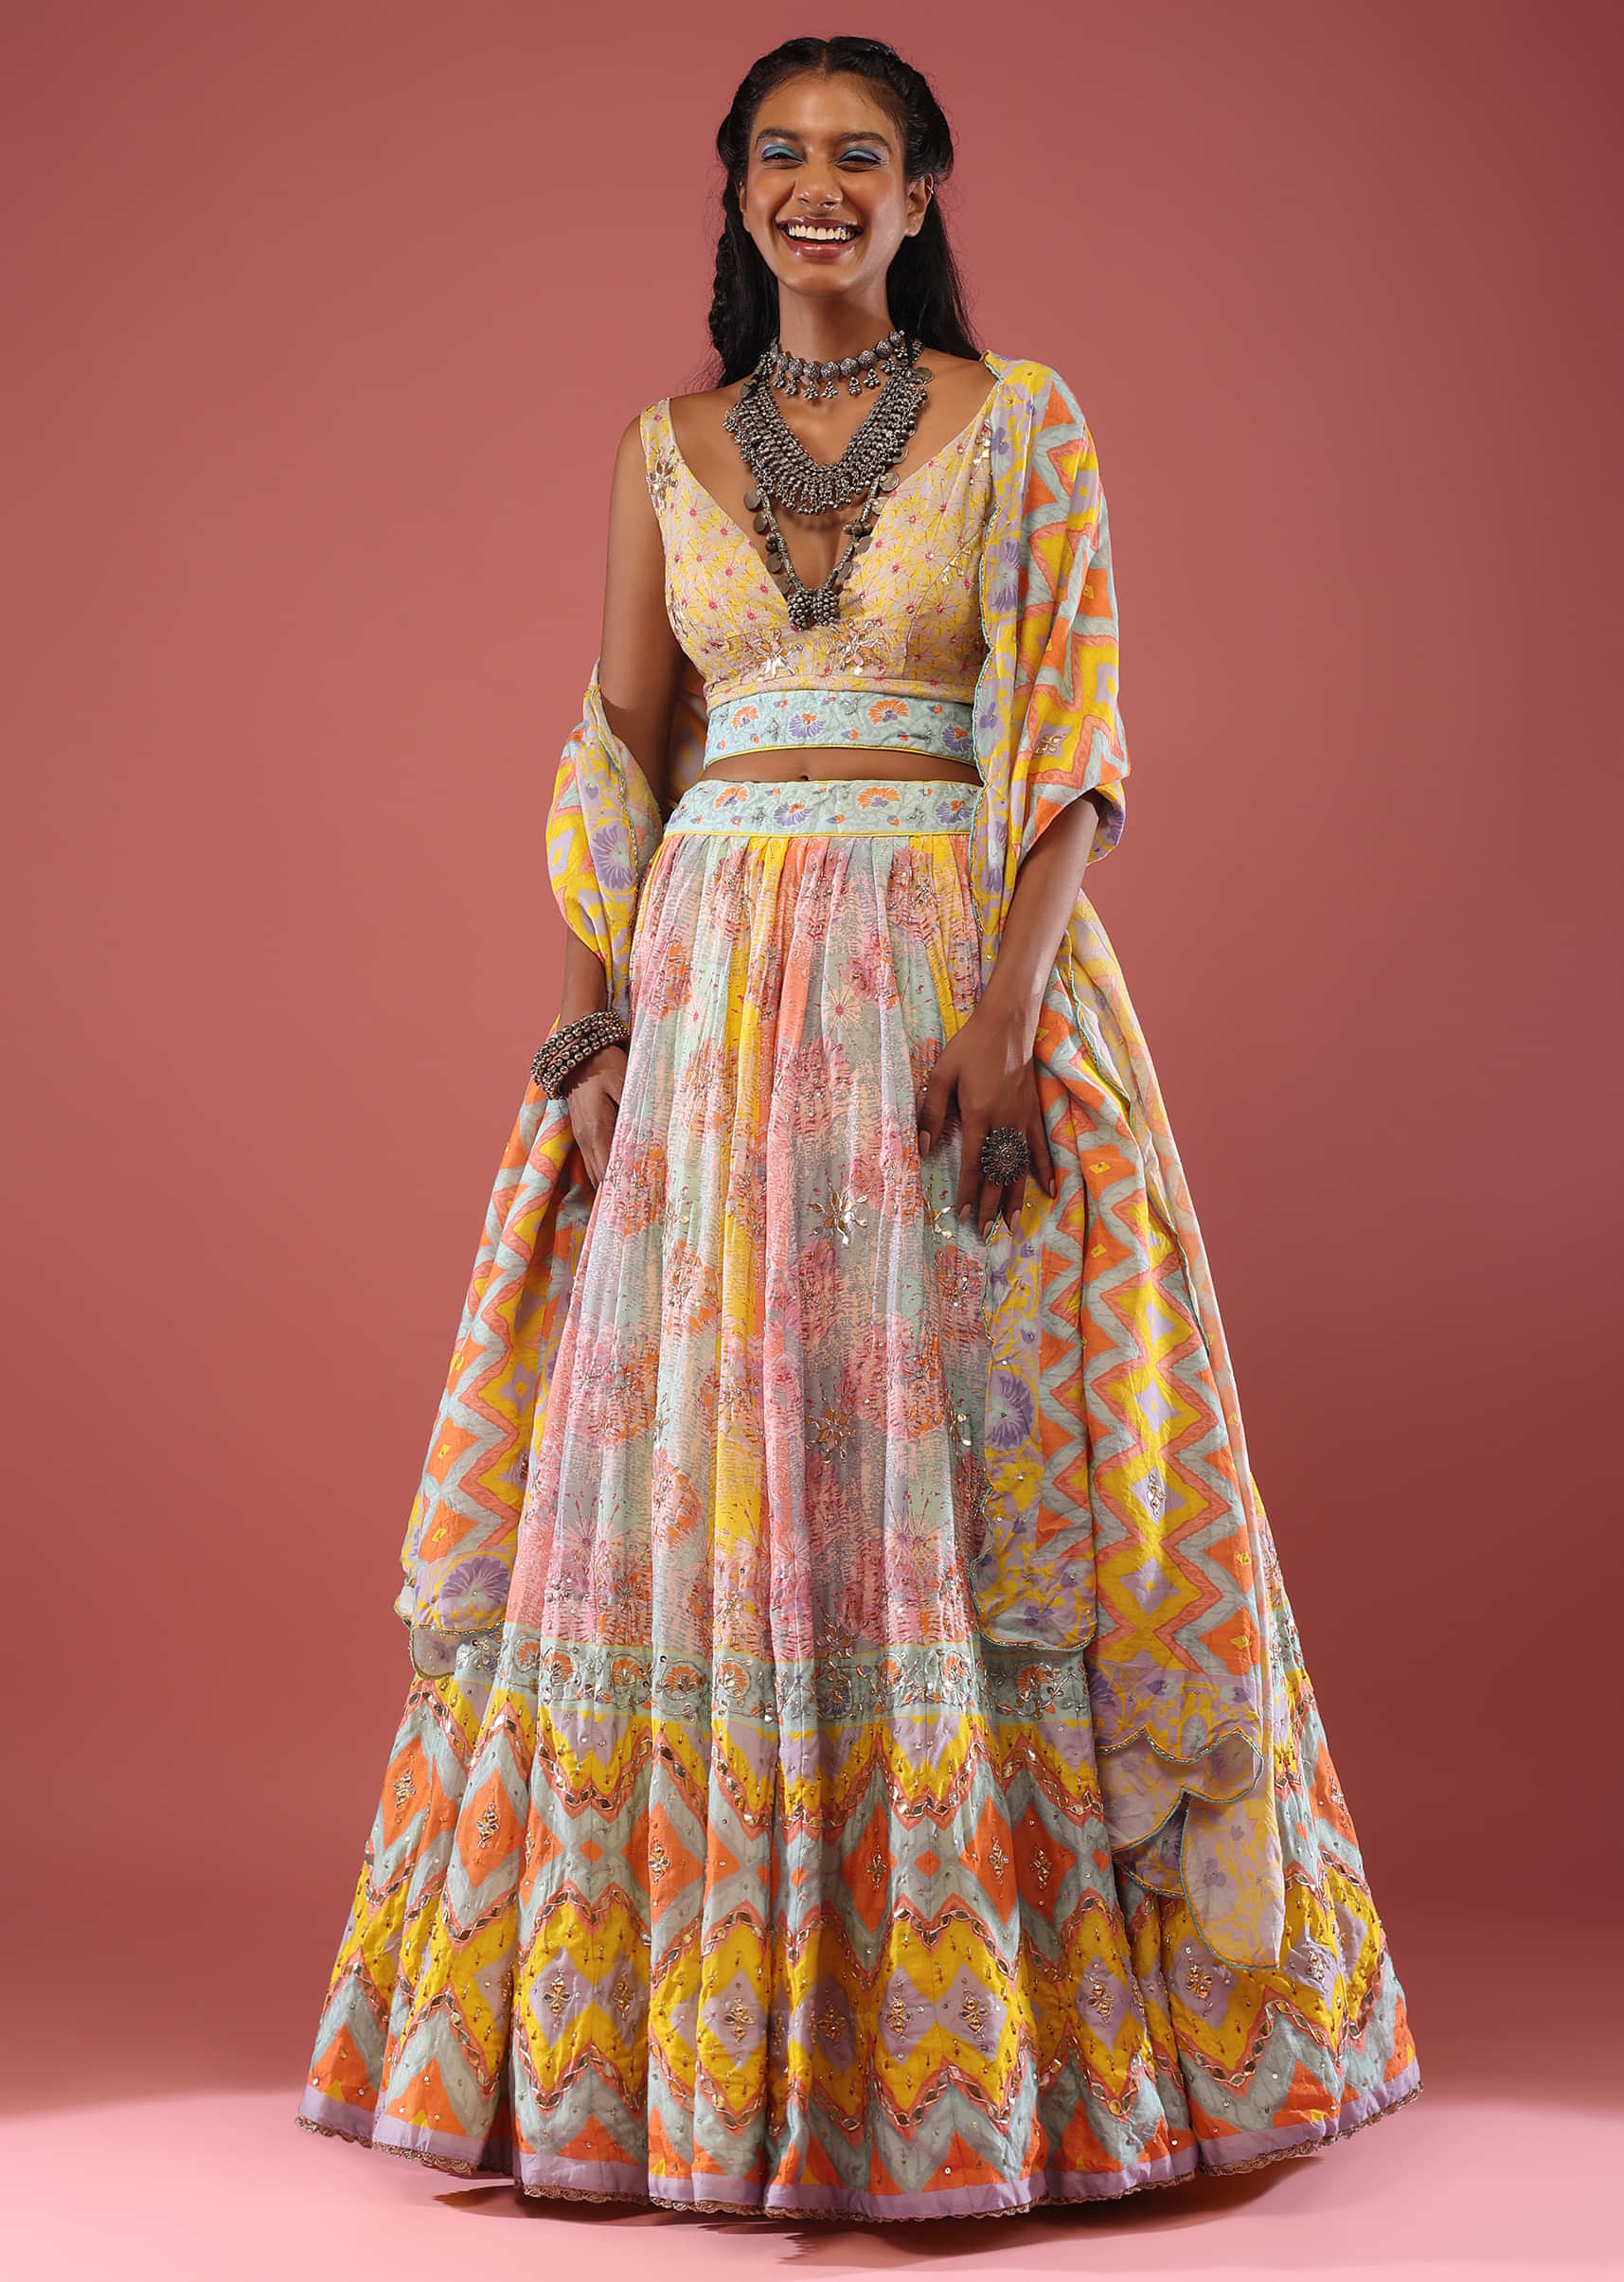 Multi Coloured Silk Lehenga With Hand Embroidery On The Skirt And Abstract Print